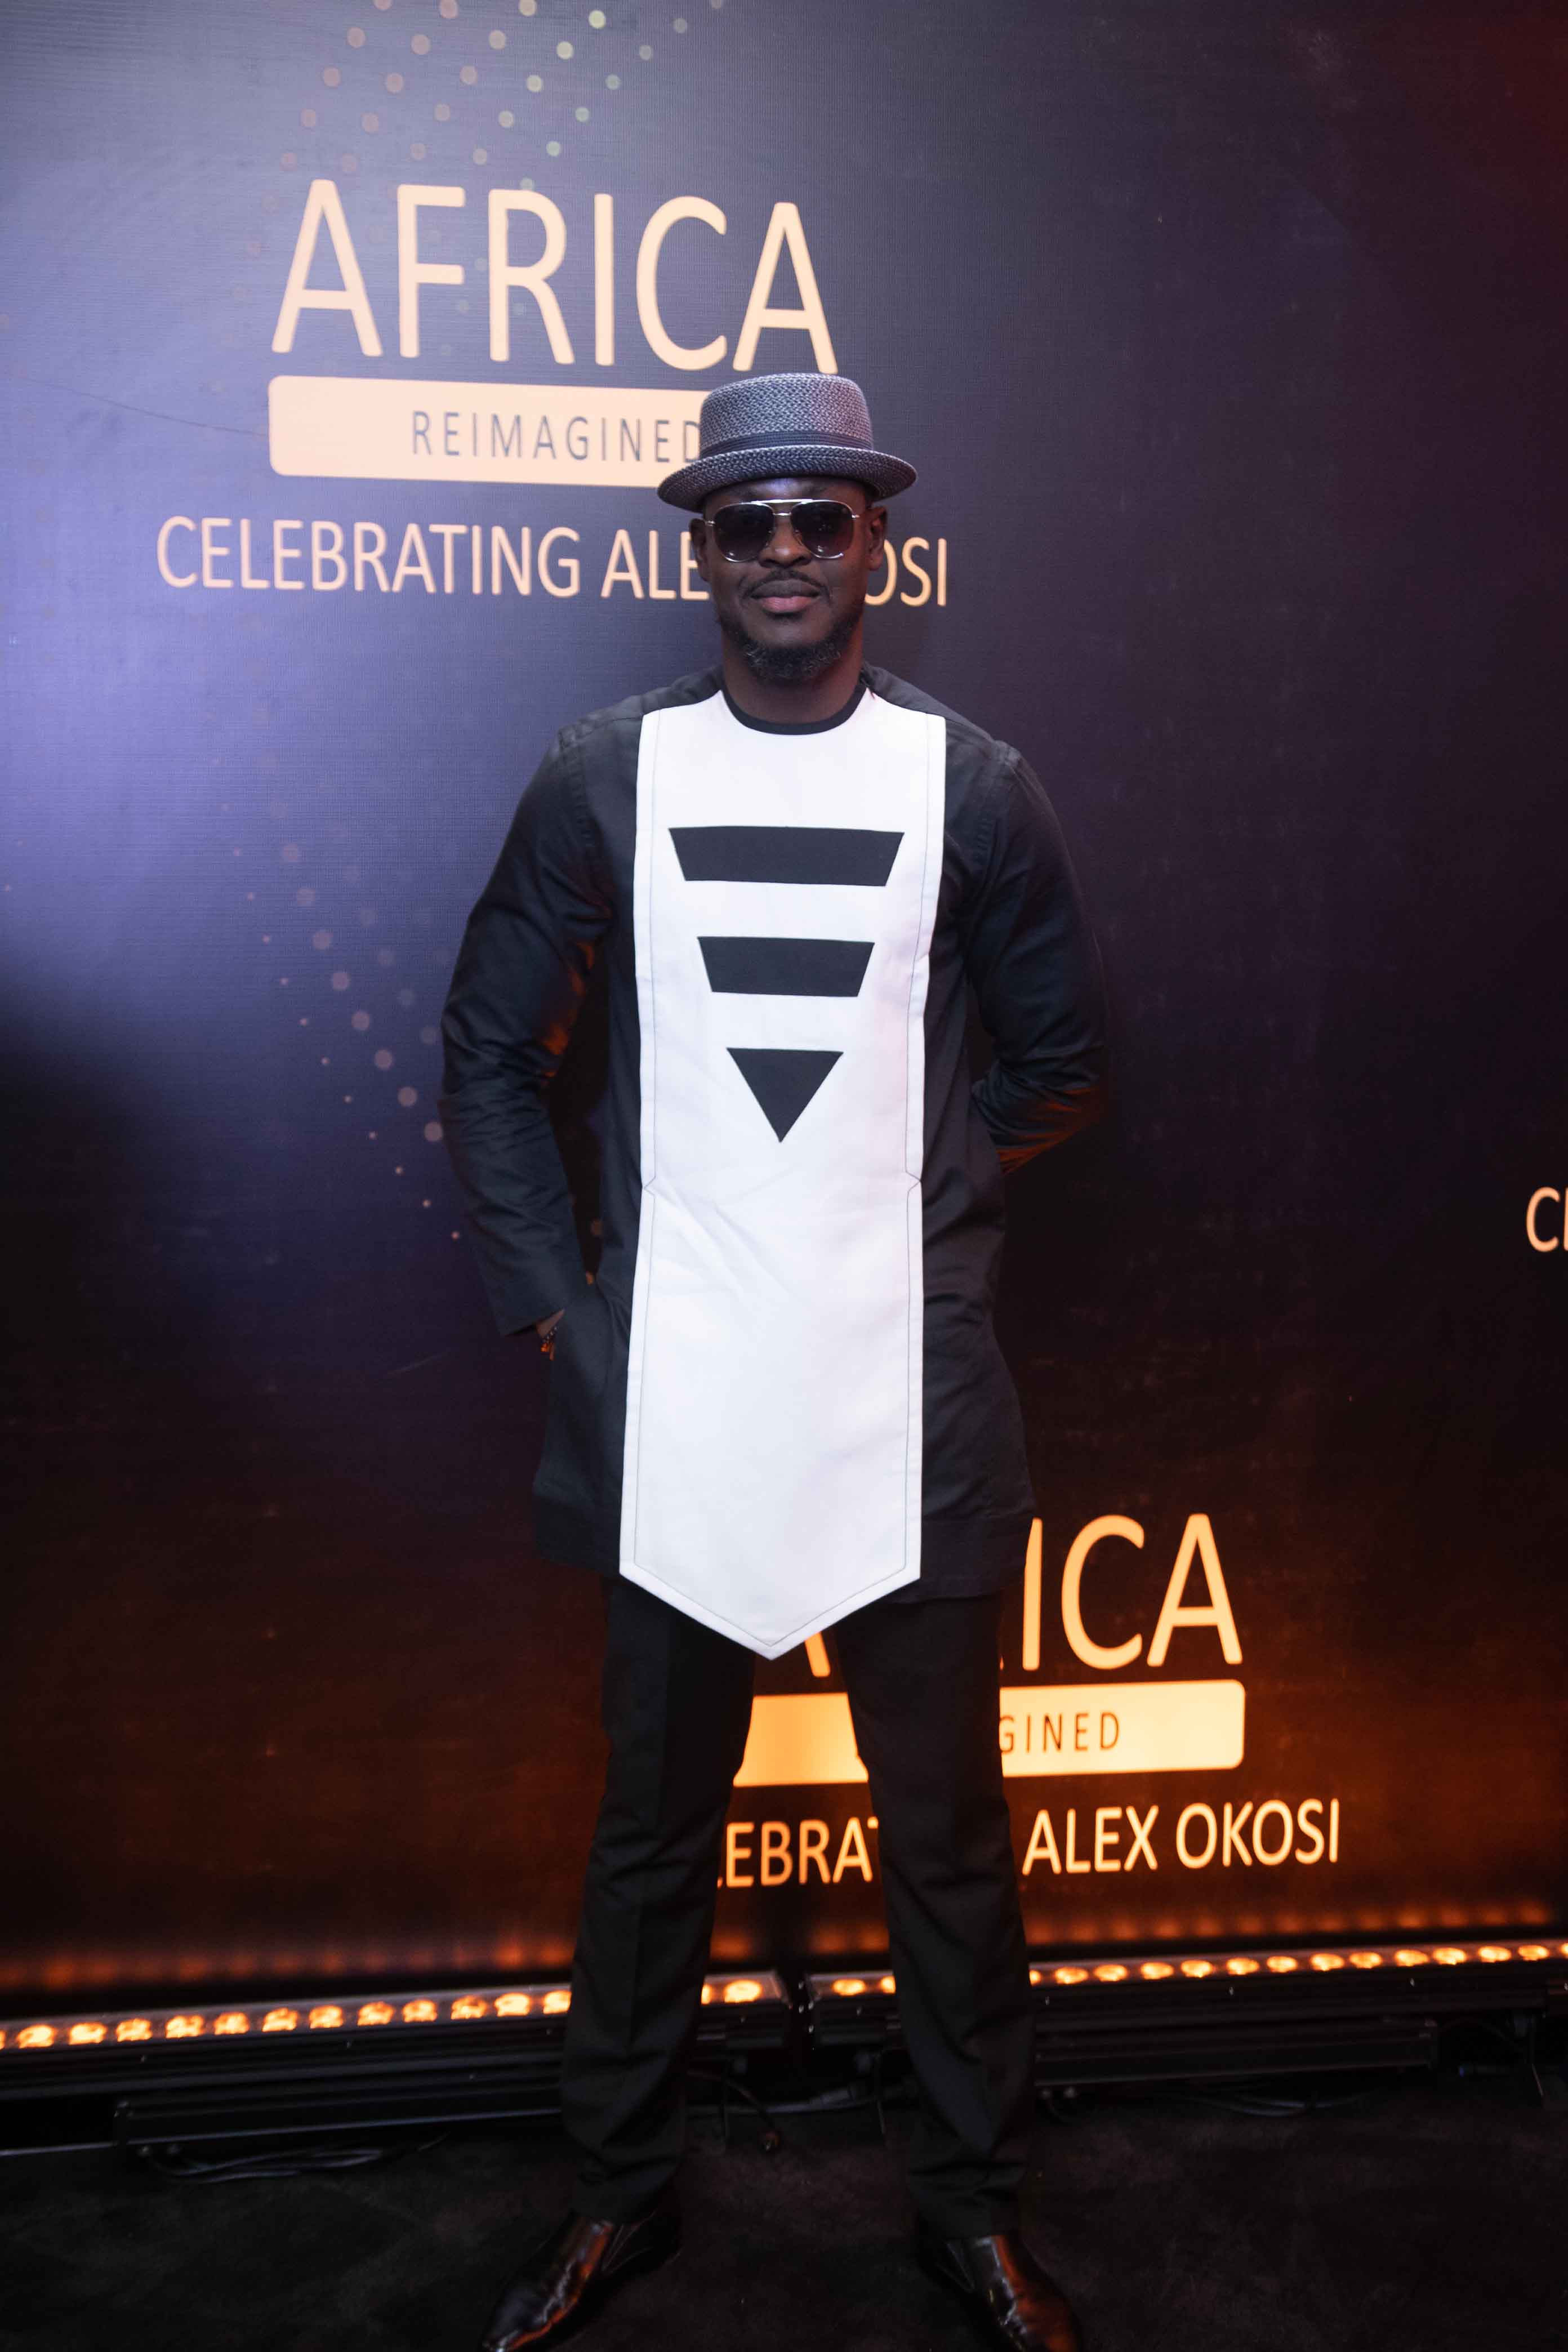 Ben Murray-Bruce, Rita Dominic, 2Baba, Basketmouth, Others Celebrate Alex Okosi As He Bows Out Of ViacomCBS